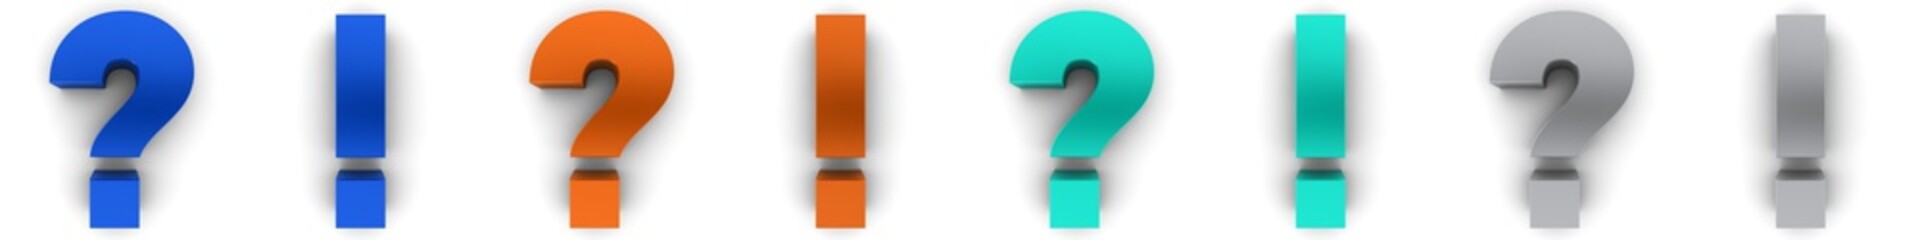 question mark exclamation point q and a sign blue orange silver icon set 3d render interrogation points punctuation marks isolated on white